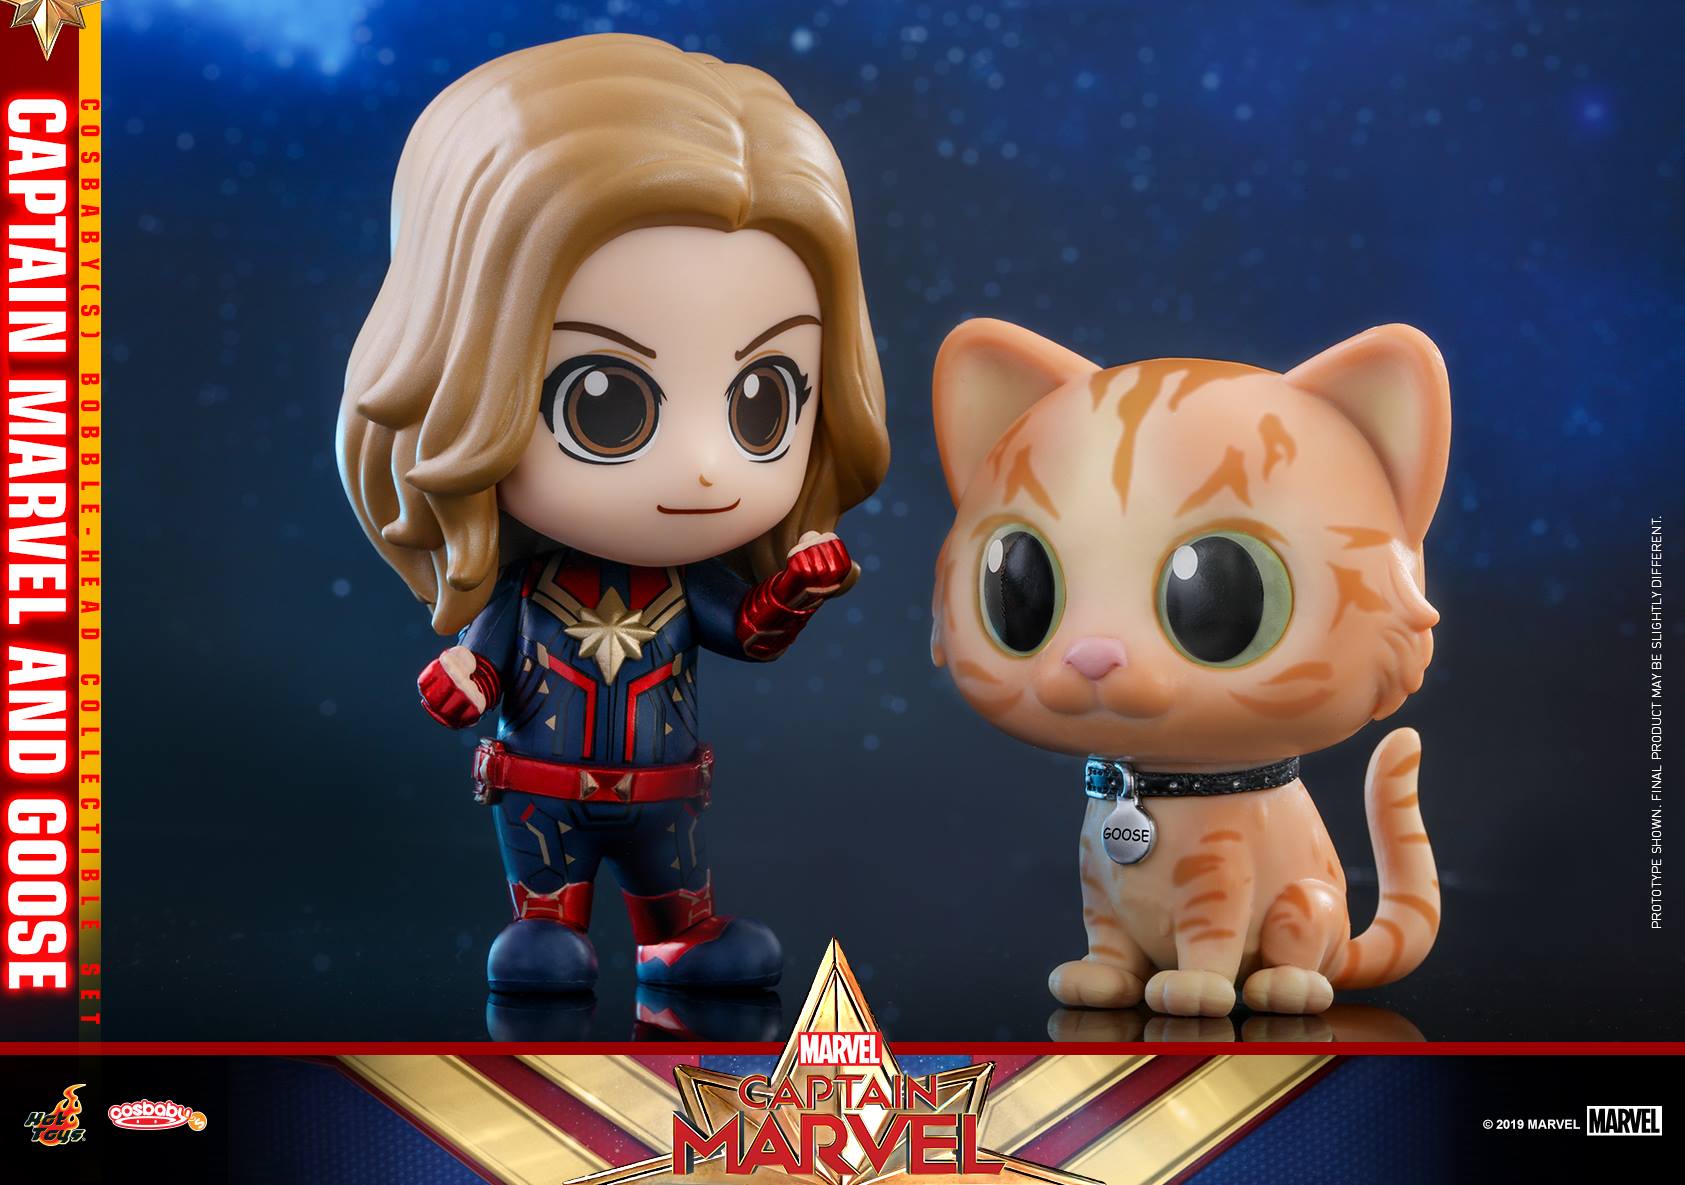 New Captain Marvel Cosbaby Collection by Hot Toys Coming